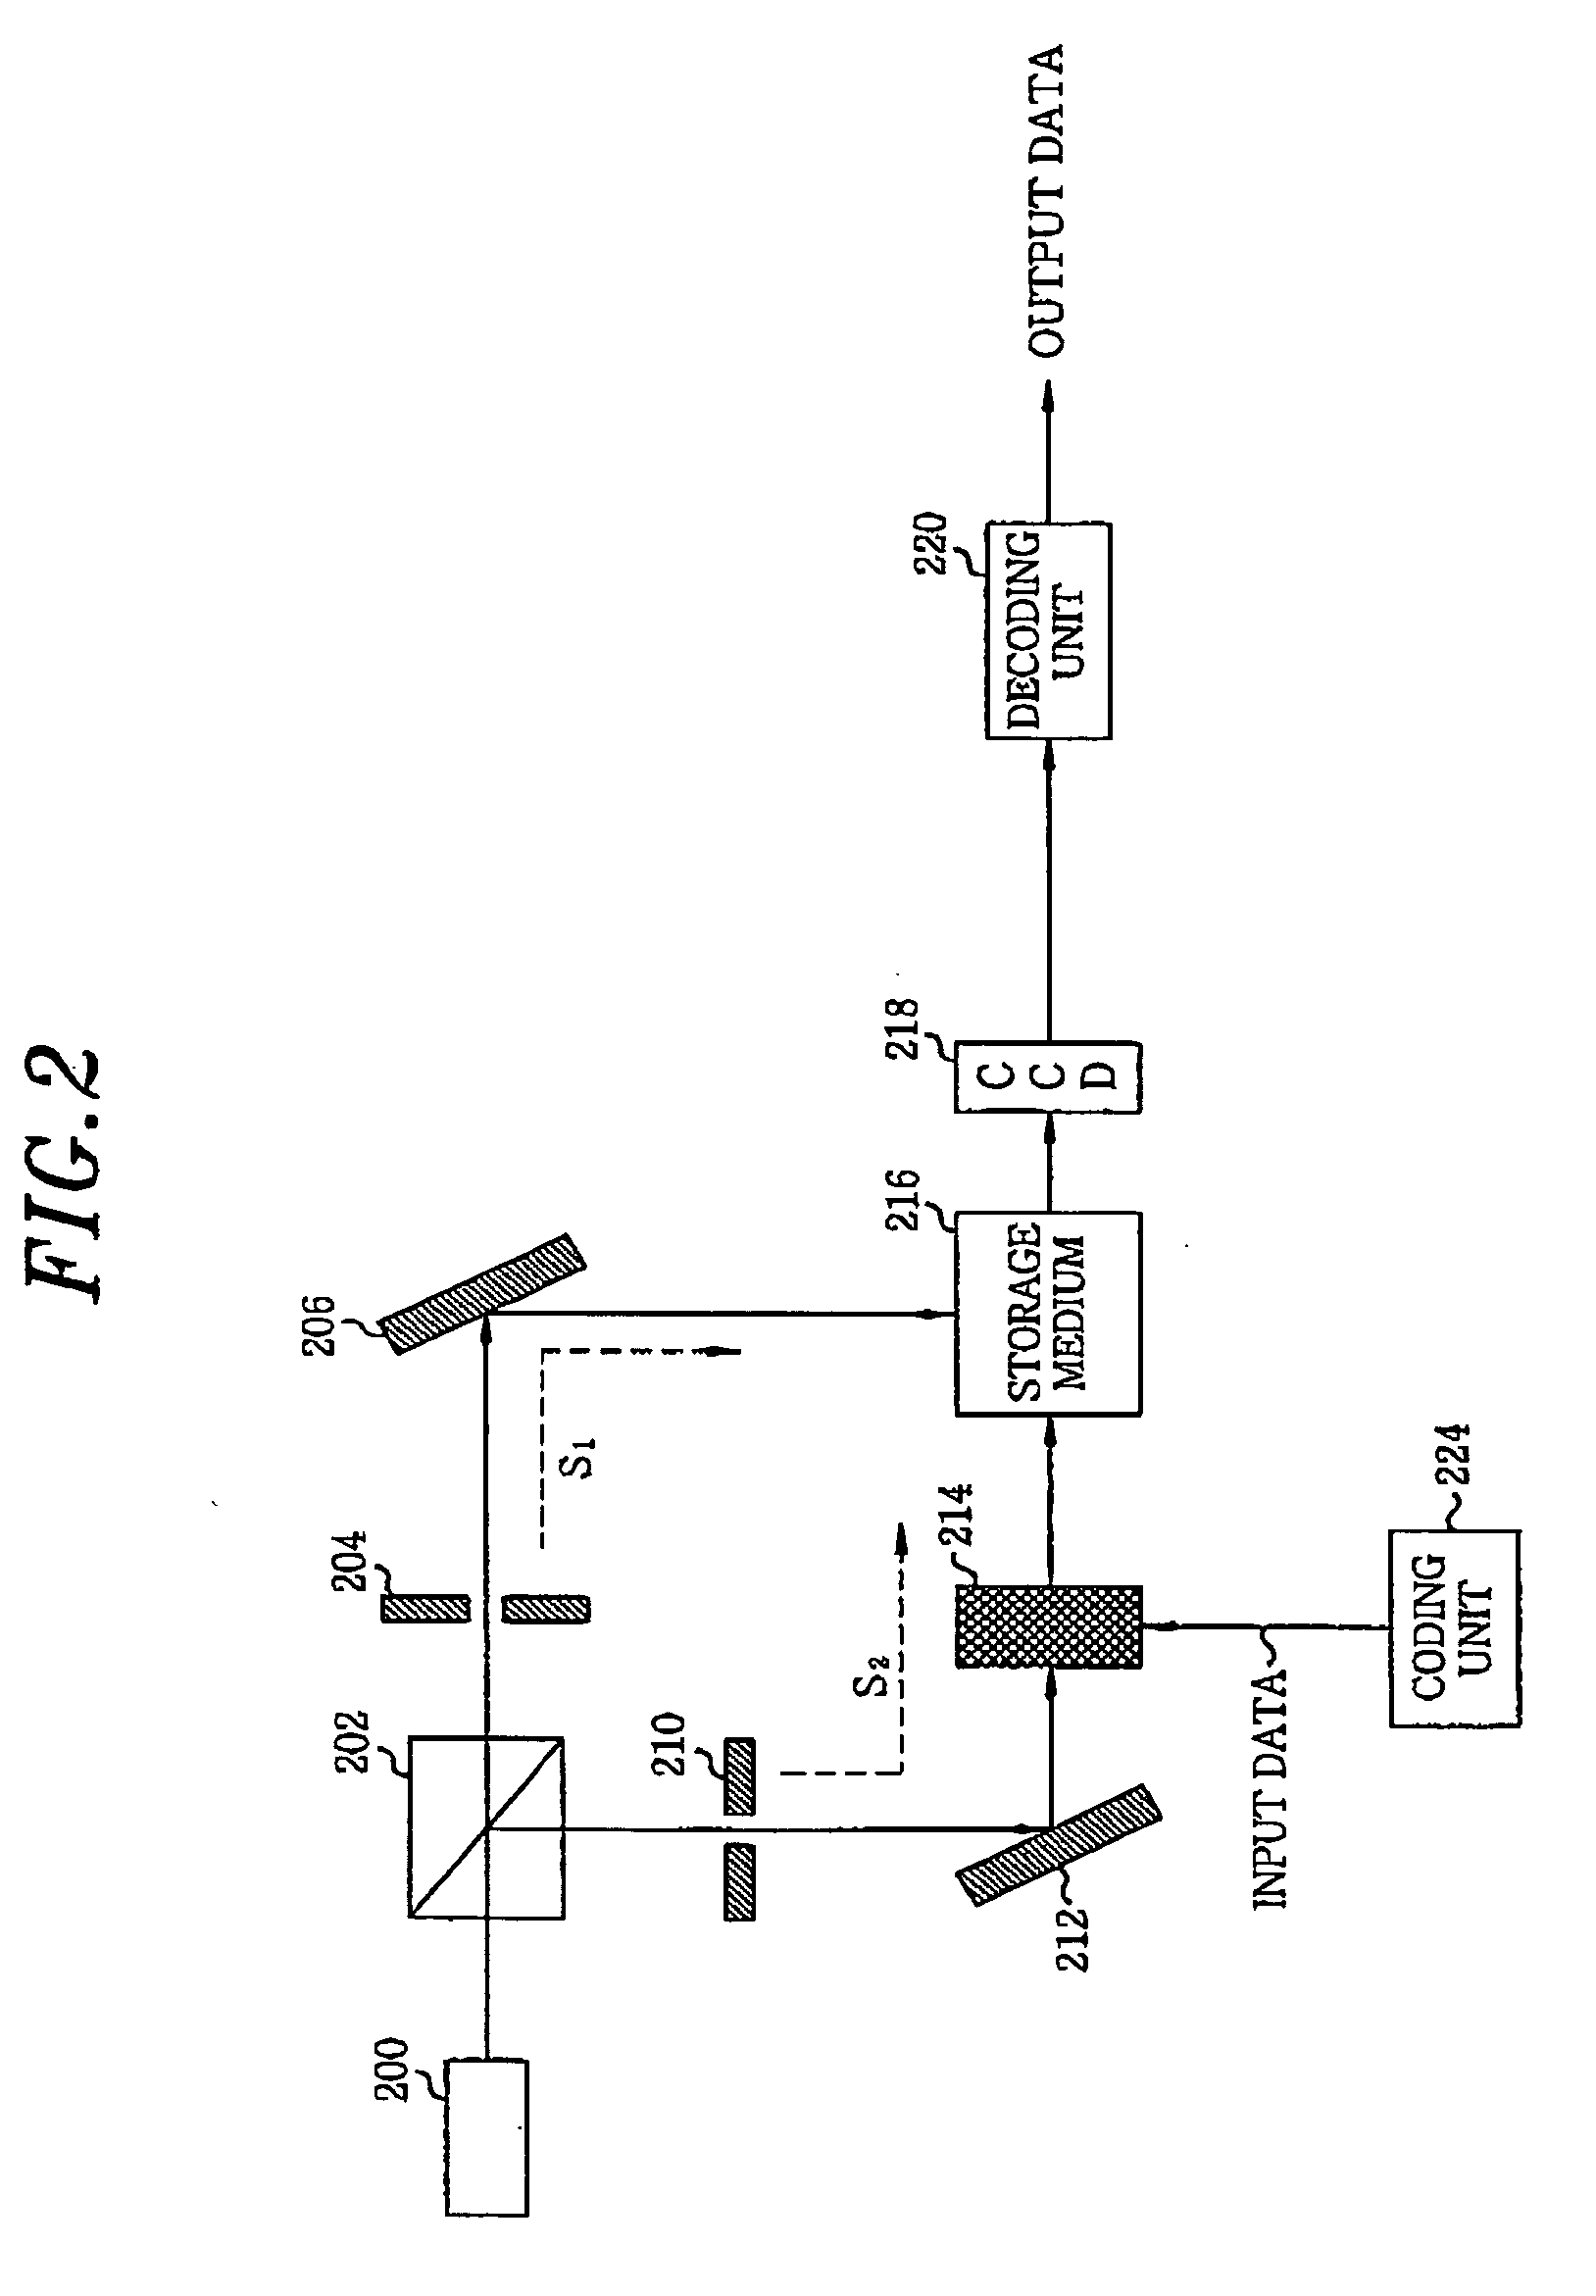 Image correction method for compensating for misalignment of pixels in holographic digital data storage system